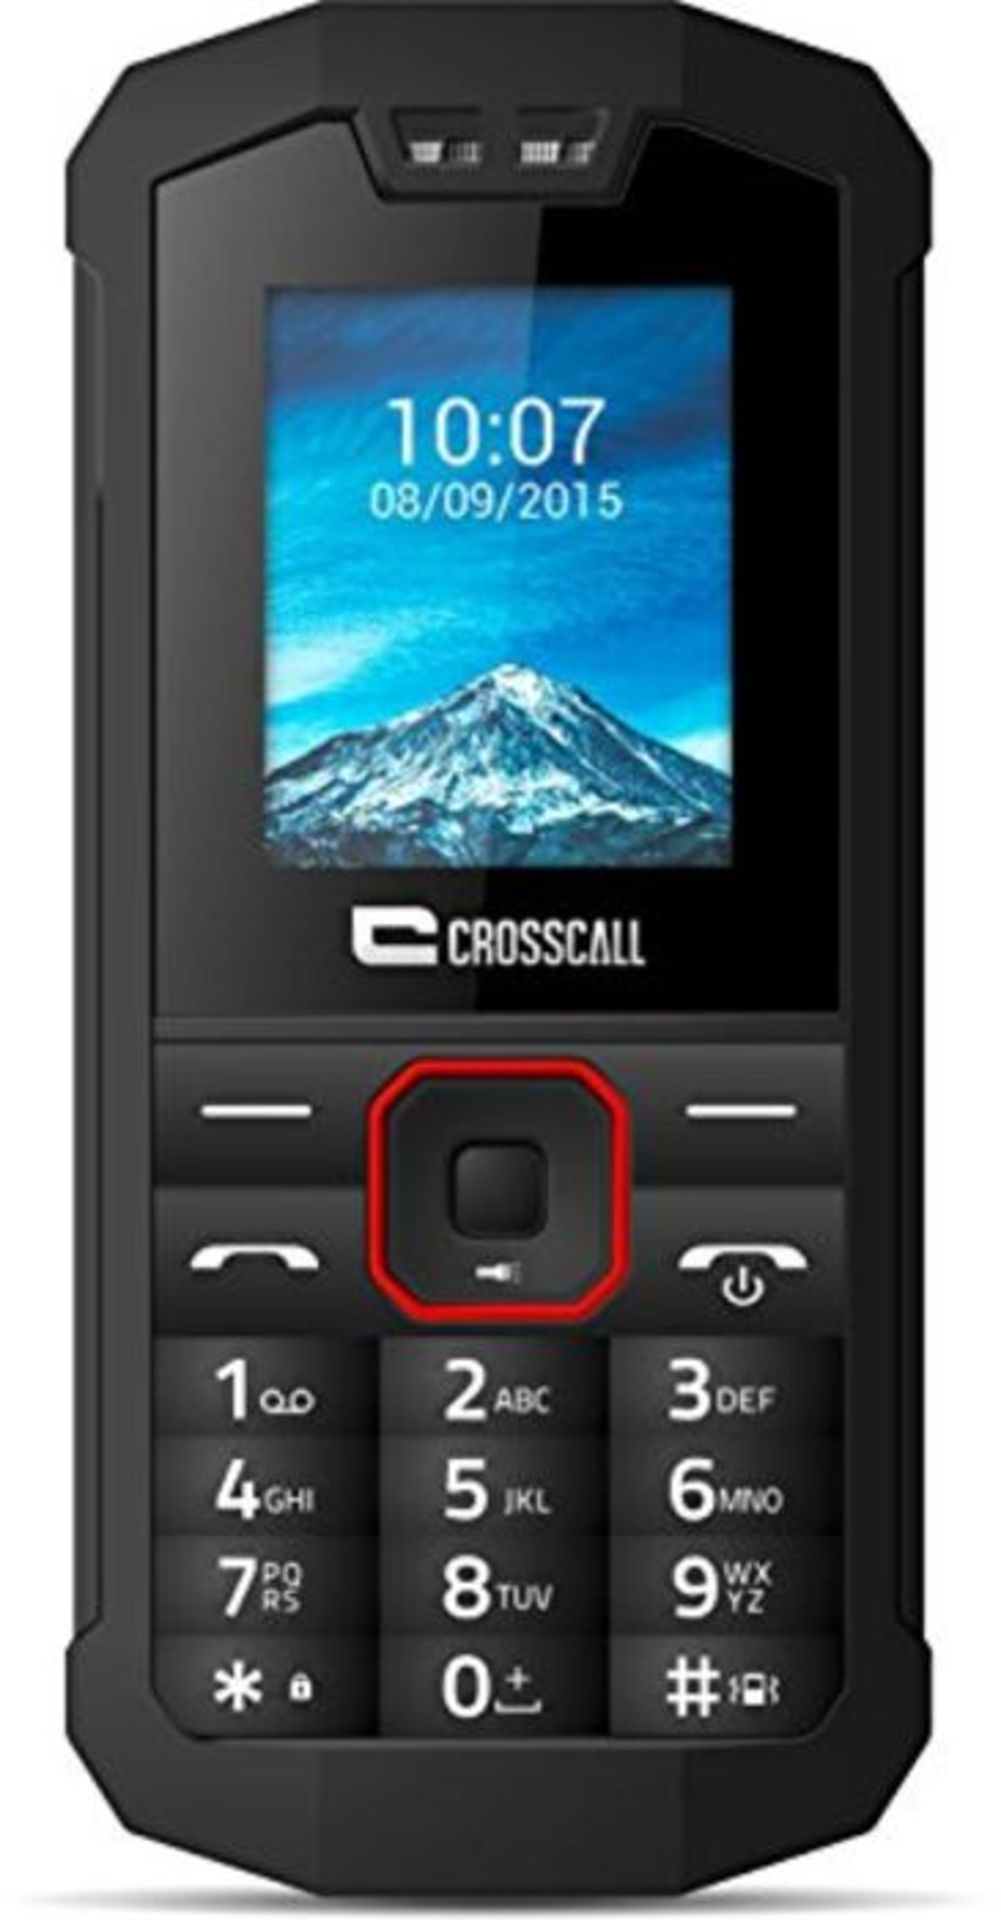 RRP £54.00 Crosscall Spider-X1 Unlocked Mobile Phone 2G (Screen: 1.77 inches - 32 MB ROM - Dual S